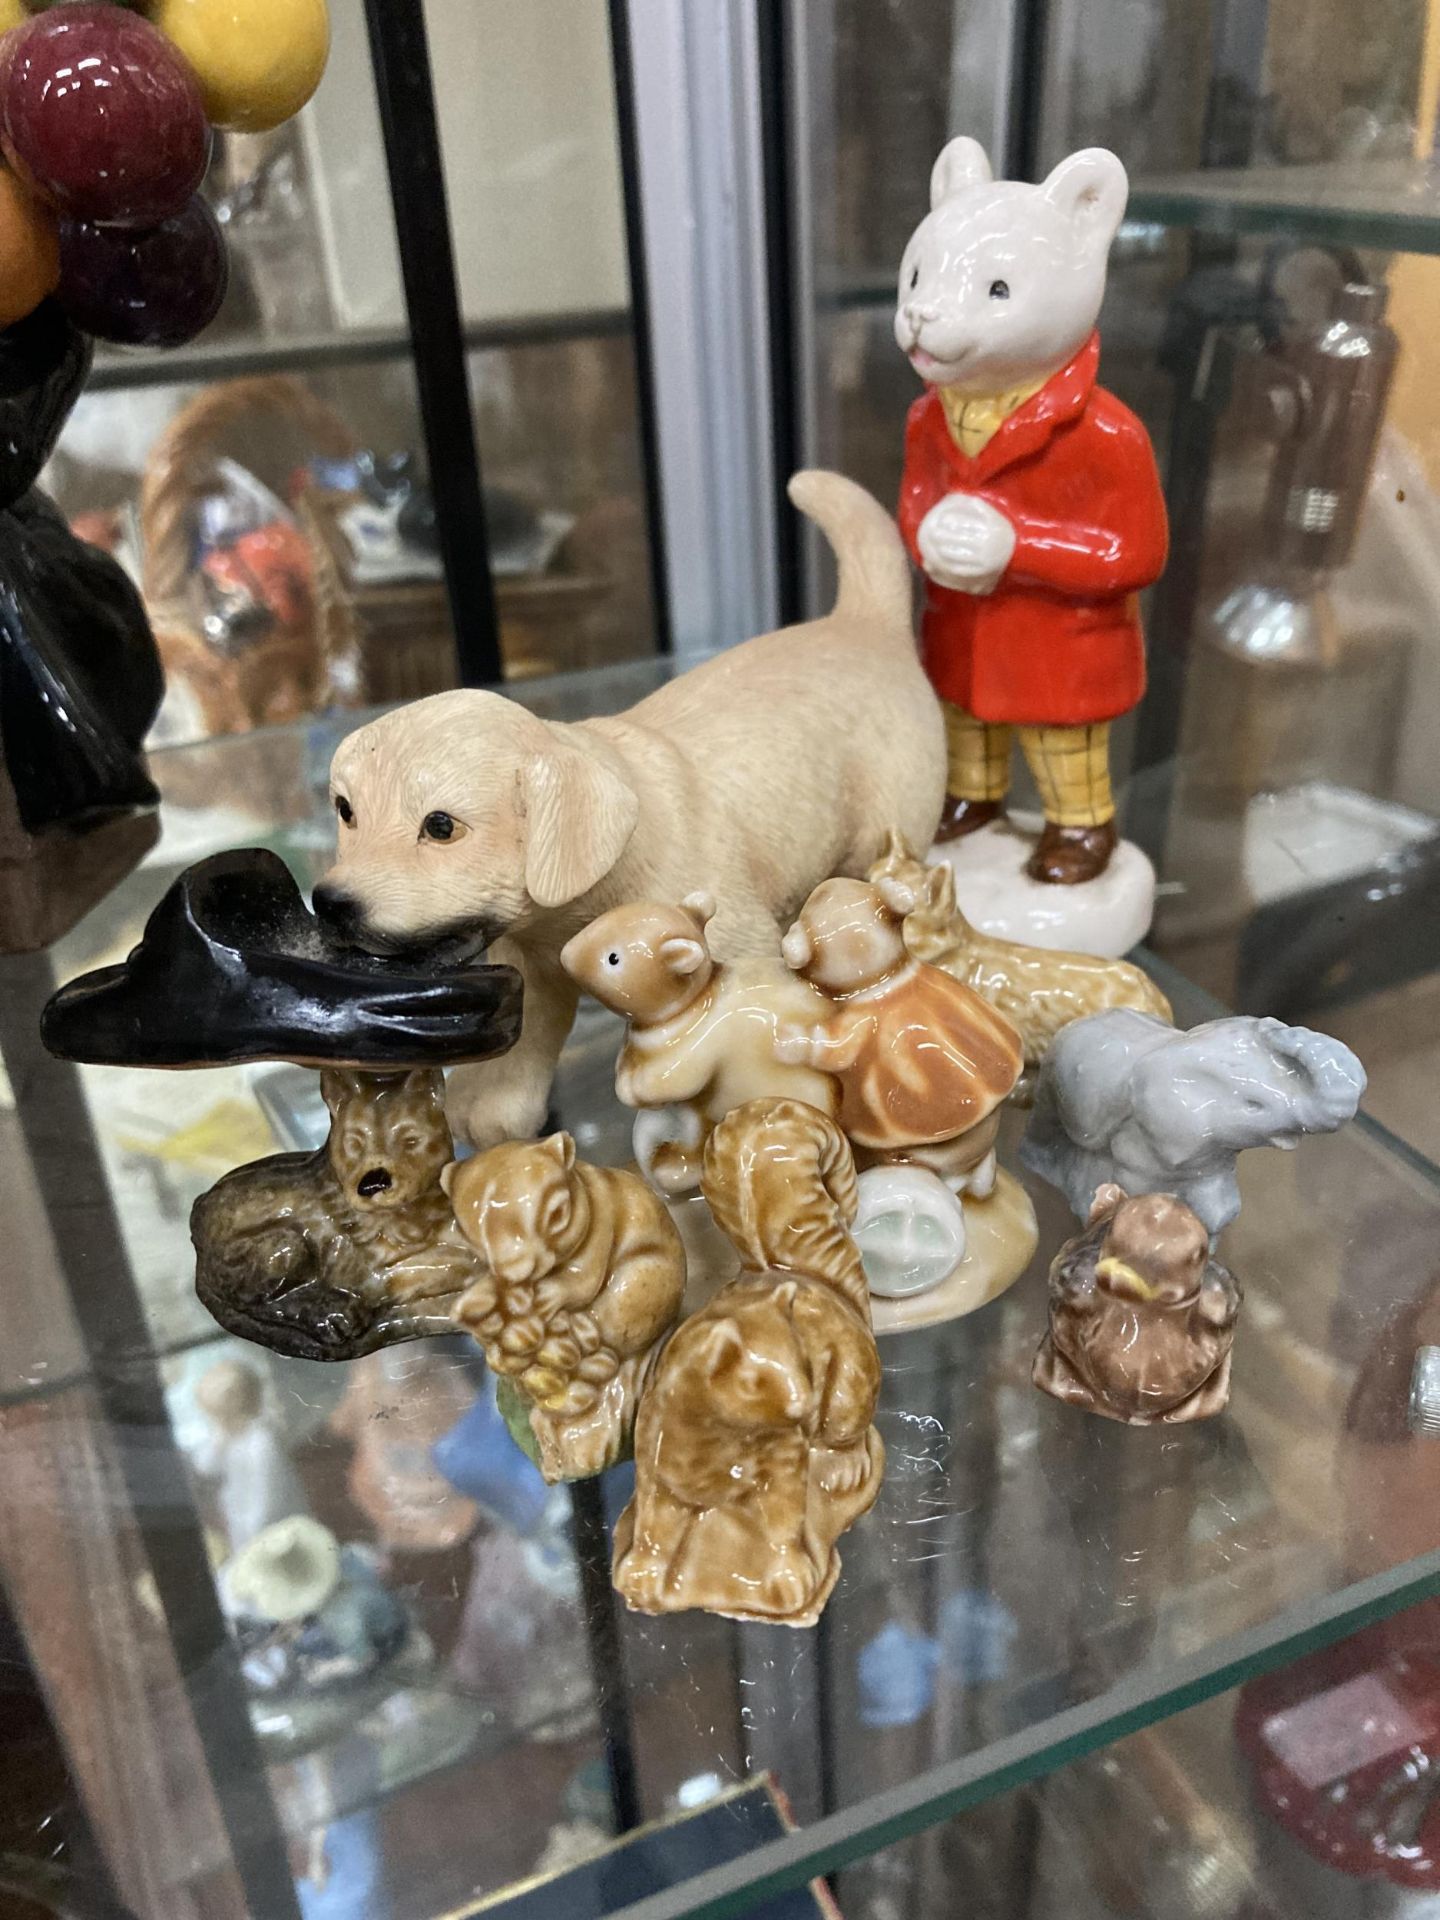 A COLLECTION OF ANIMAL FIGURES, JOHN BESWICK RUPERT THE BEAR, LEONARDO PUPPY, WADE WHIMSIES ETC - Image 3 of 5